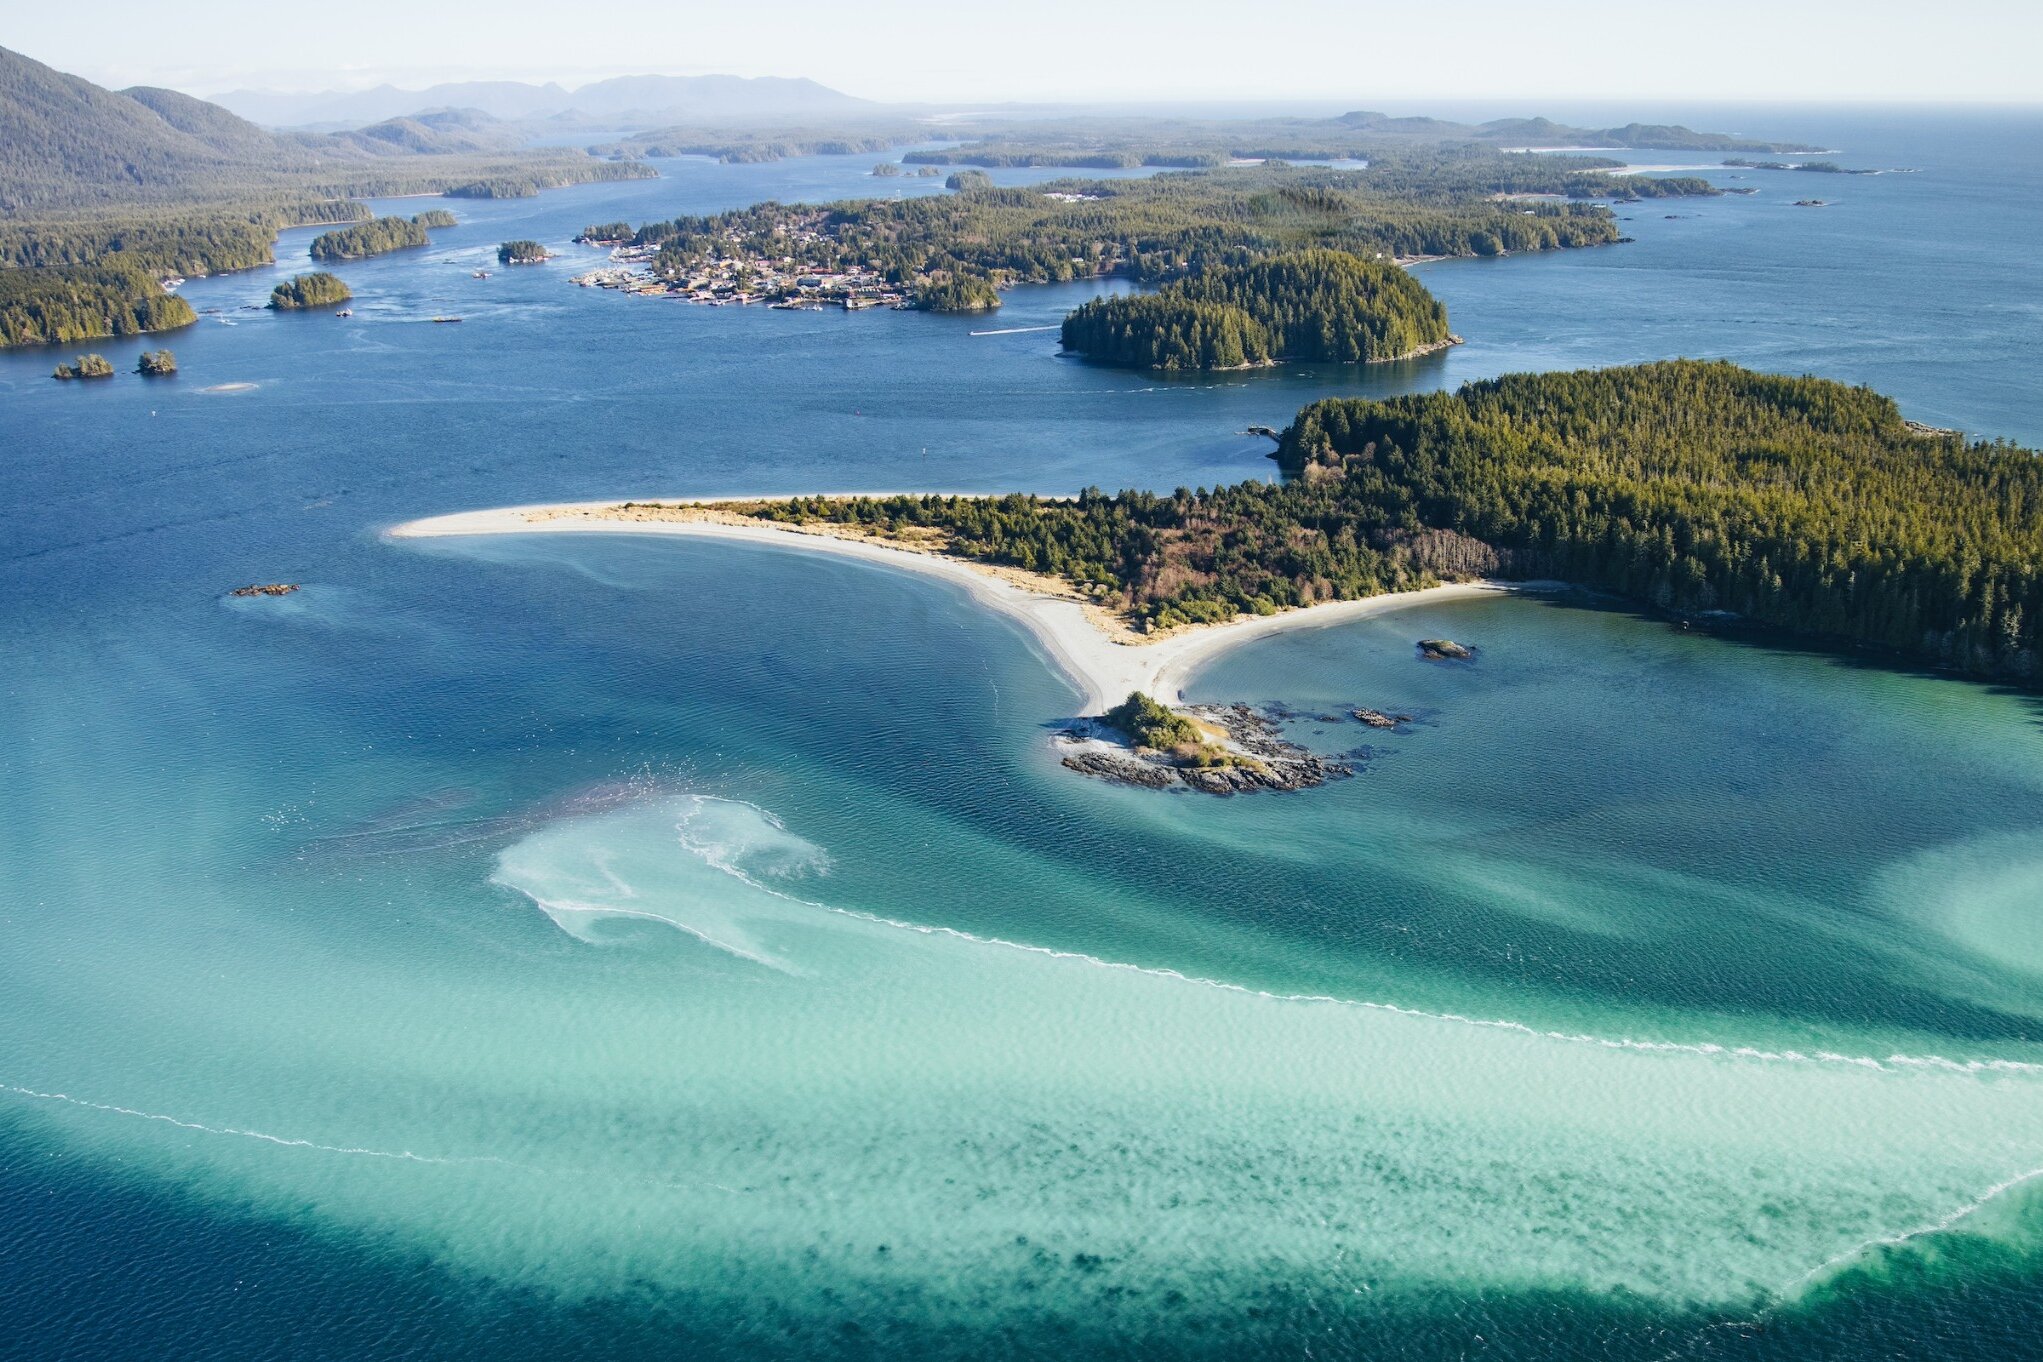 Aerial view of small forested islands, sandy beaches and the town in the distance